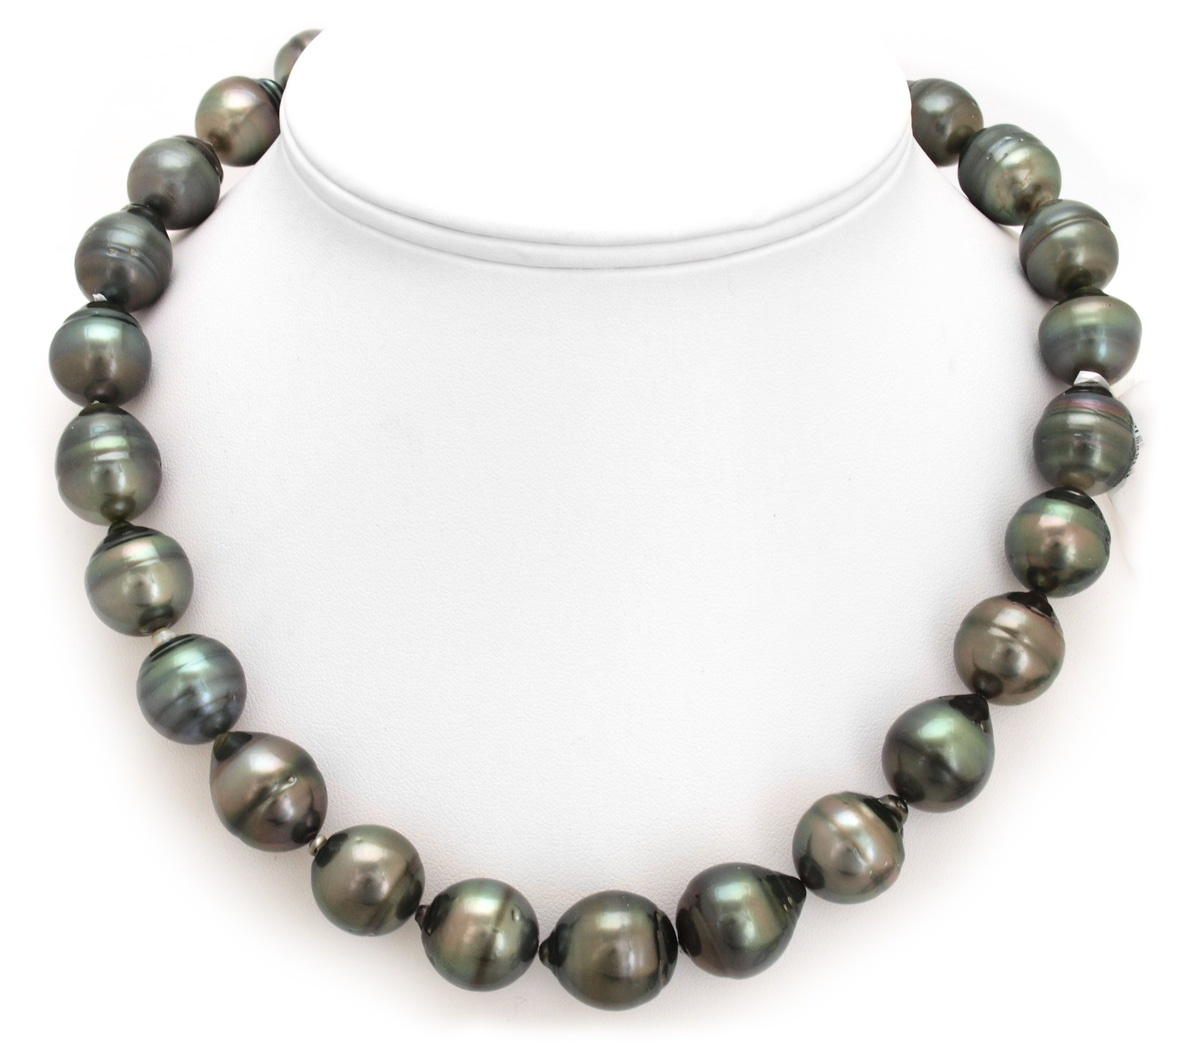 Huge Tahitian Pearl Necklace with Enormous Tahitian Pearls from 17mm to ...